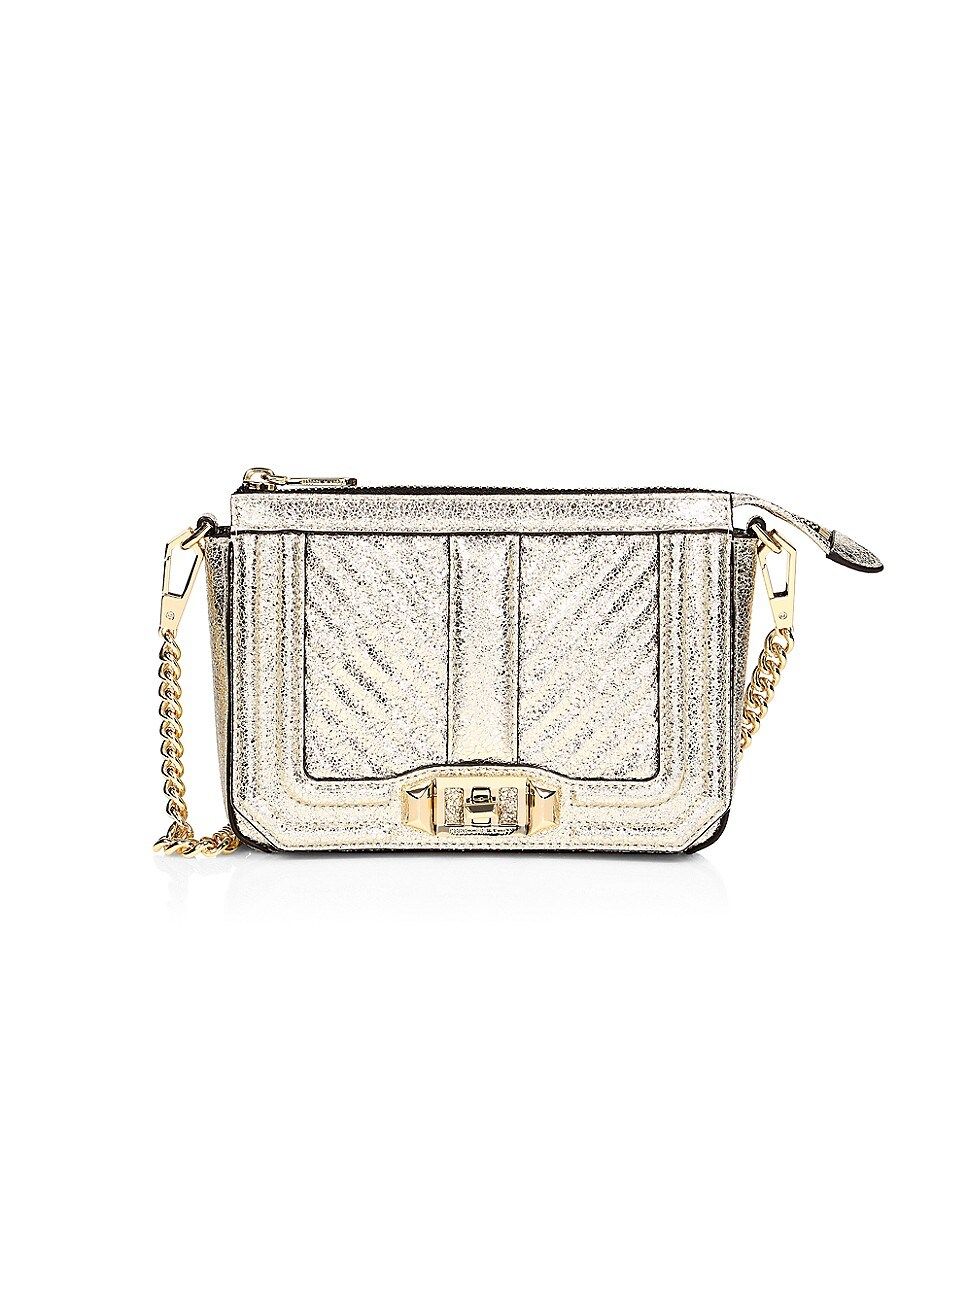 Rebecca Minkoff Women's Love Chevron Quilted Metallic Leather Shoulder Bag - Champagne | Saks Fifth Avenue